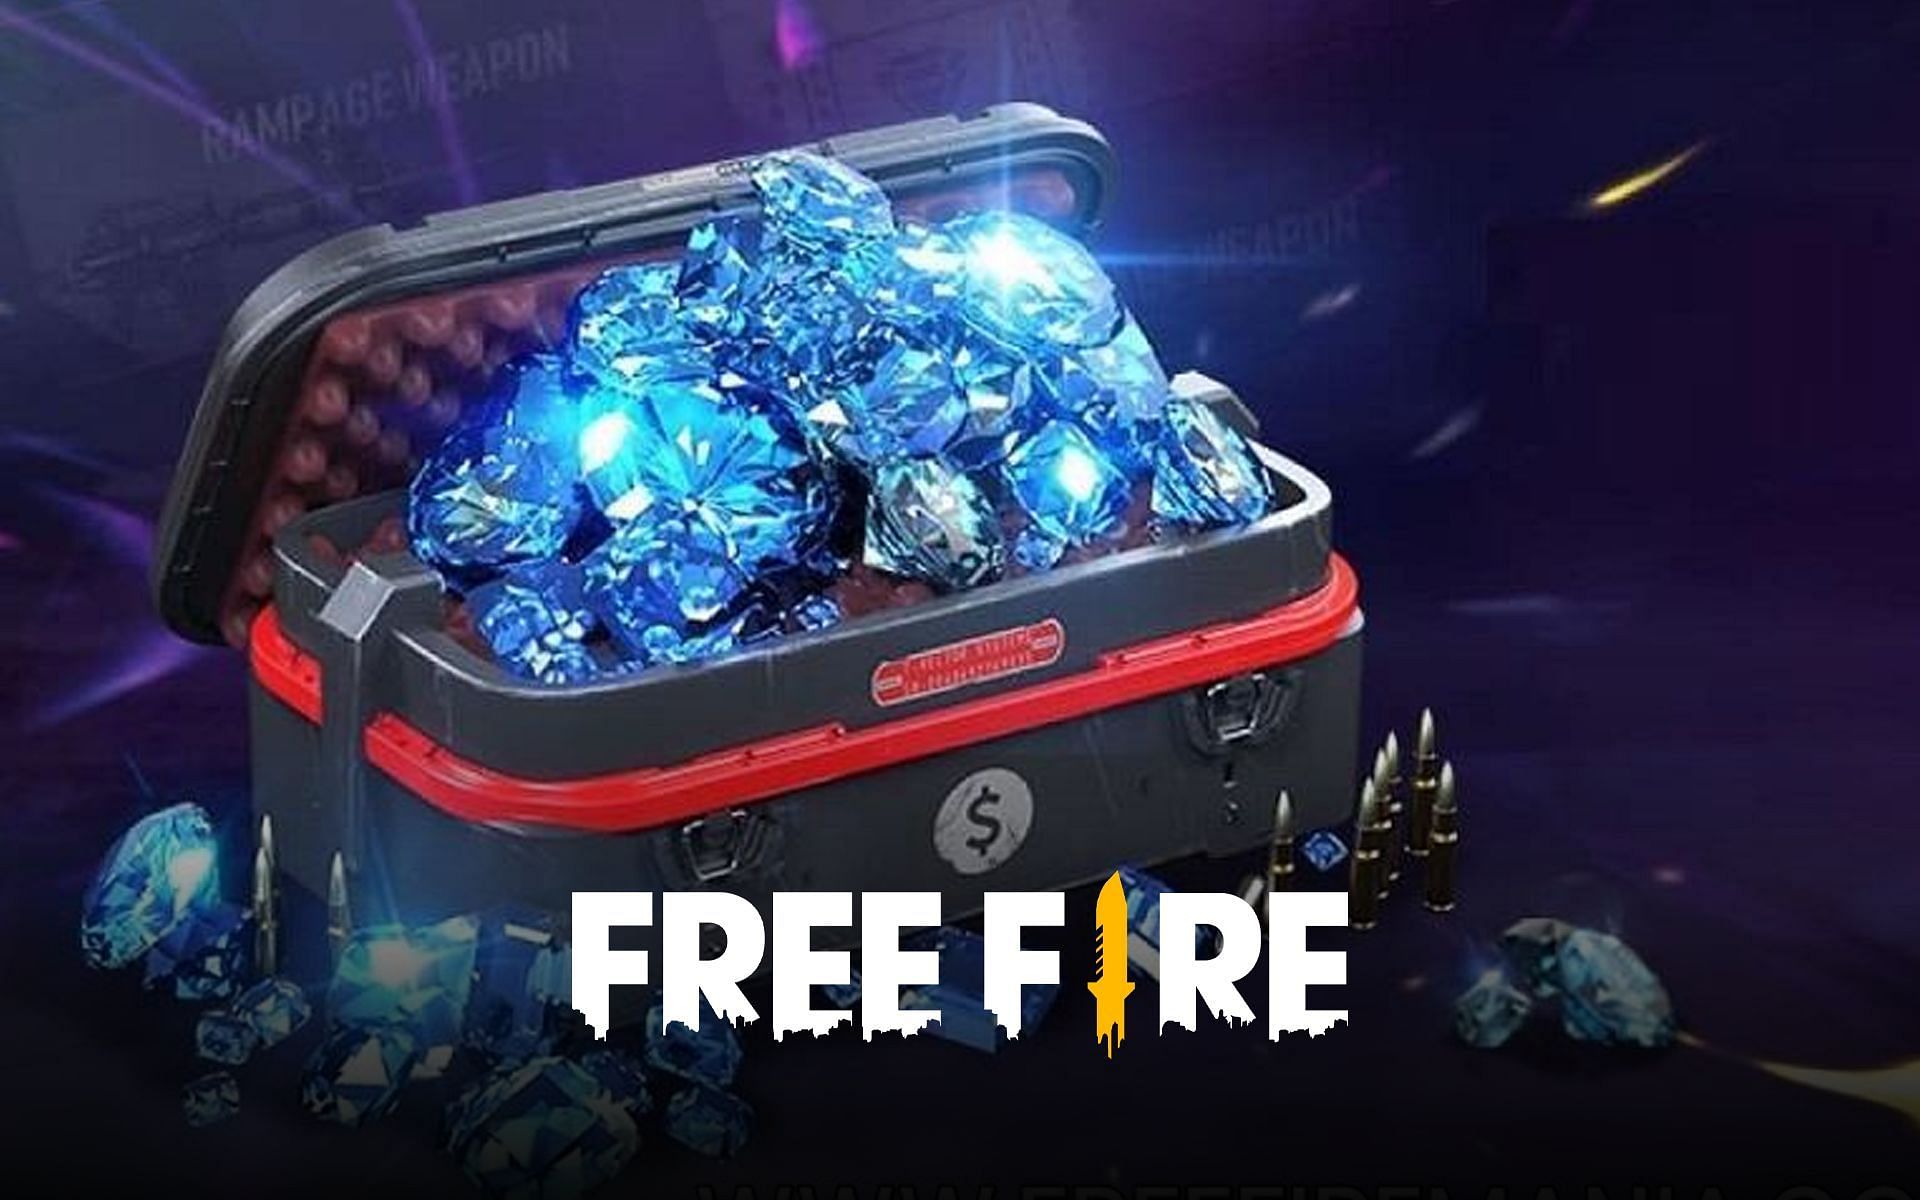 Diamonds can be purchased from within the game (Image via Free Fire)